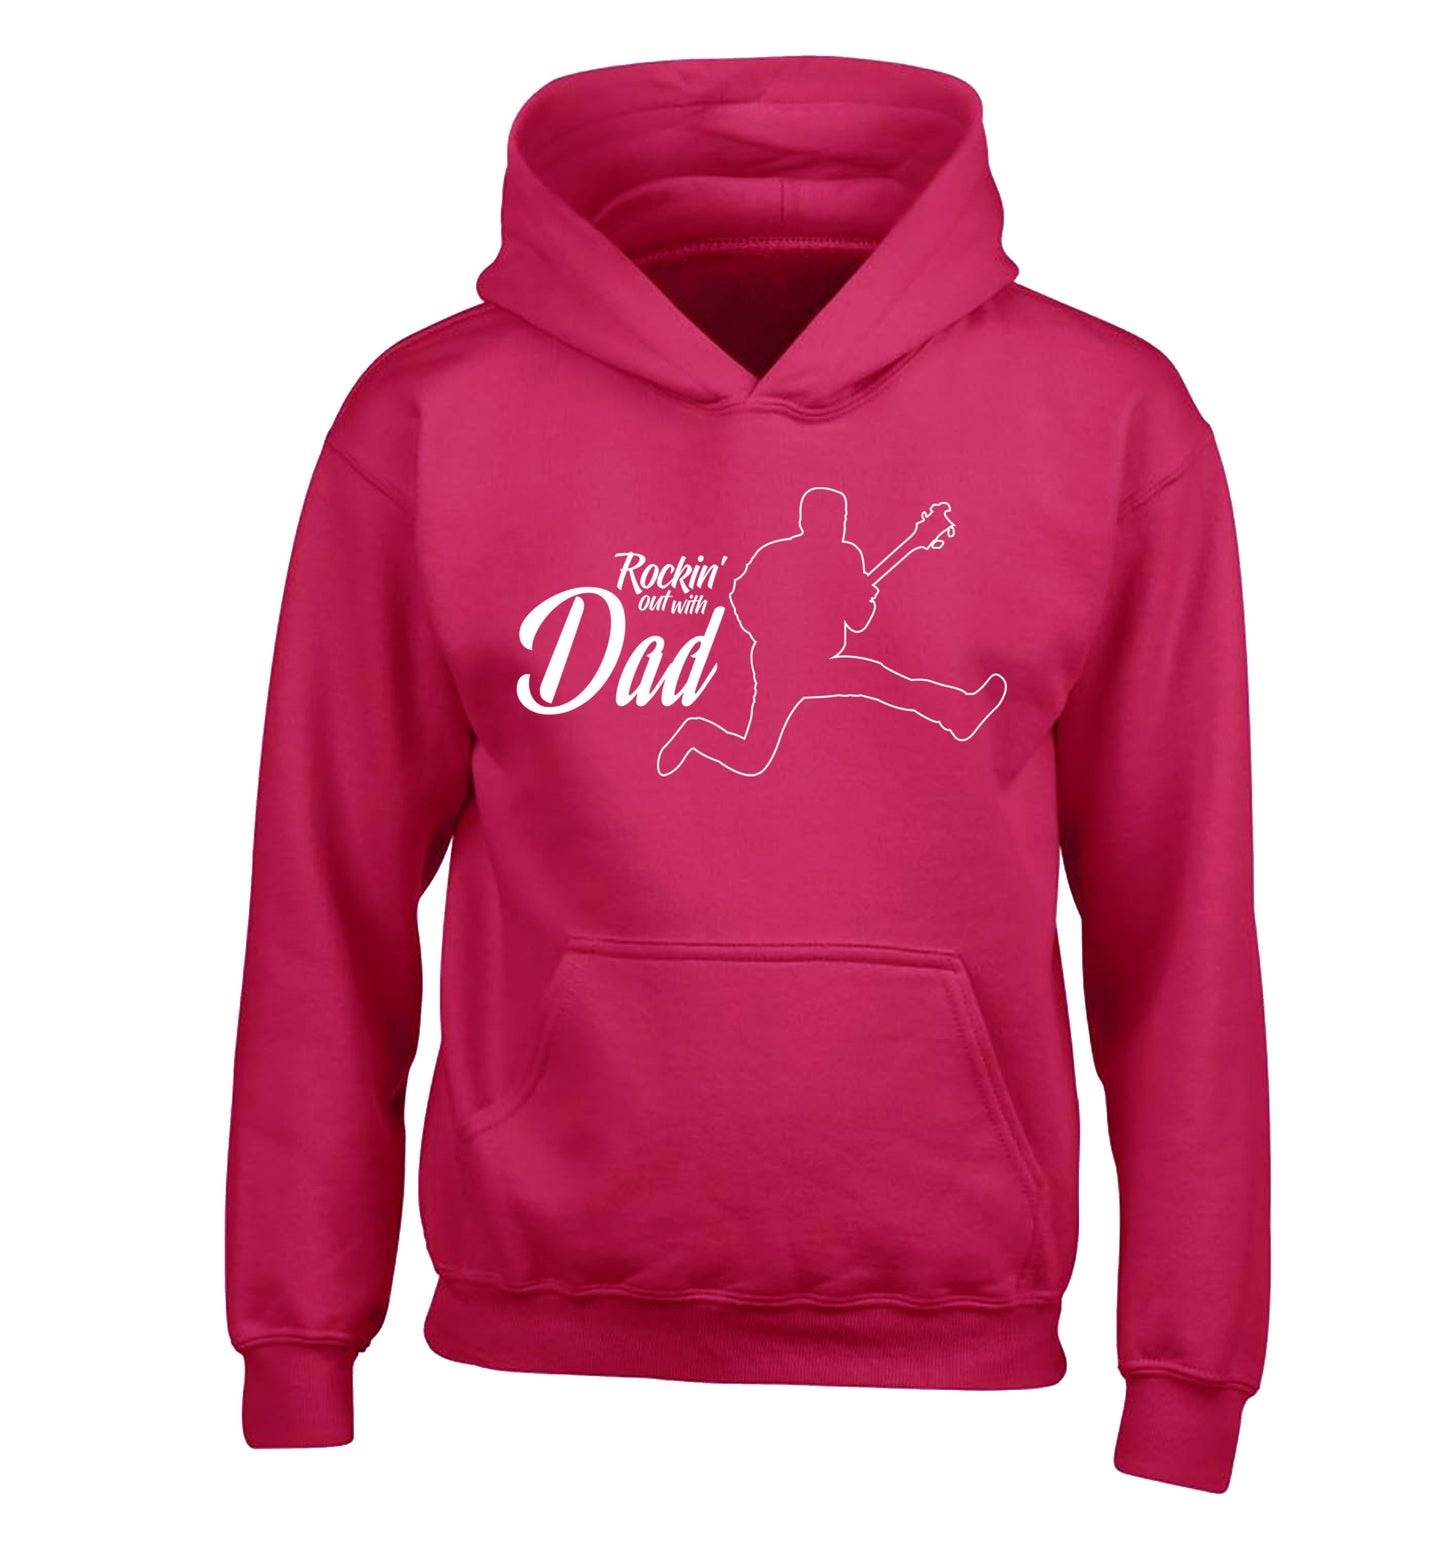 Rockin out with dad children's pink hoodie 12-13 Years